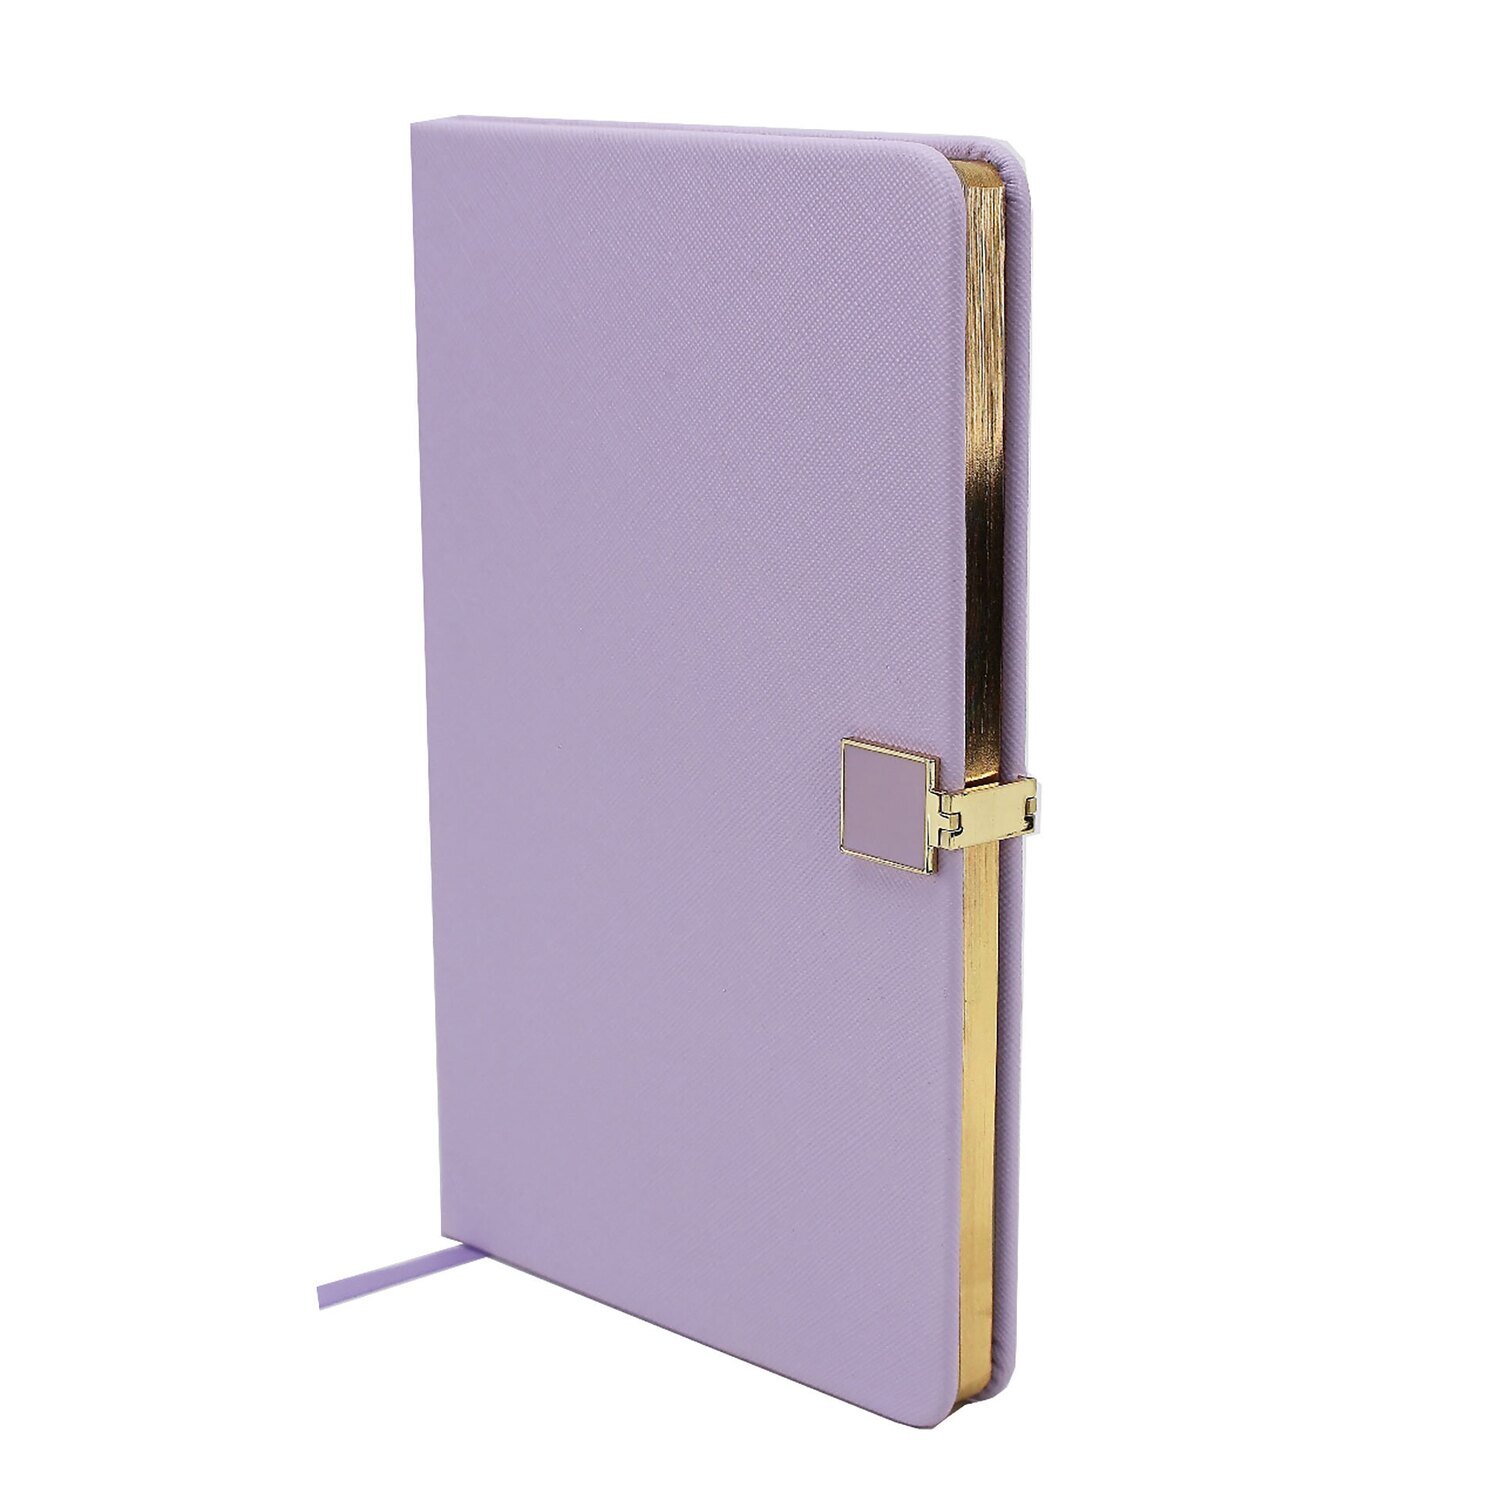 Addison Ross Lilac & Gold Notebook A5 Inch Pu Leather NB1000